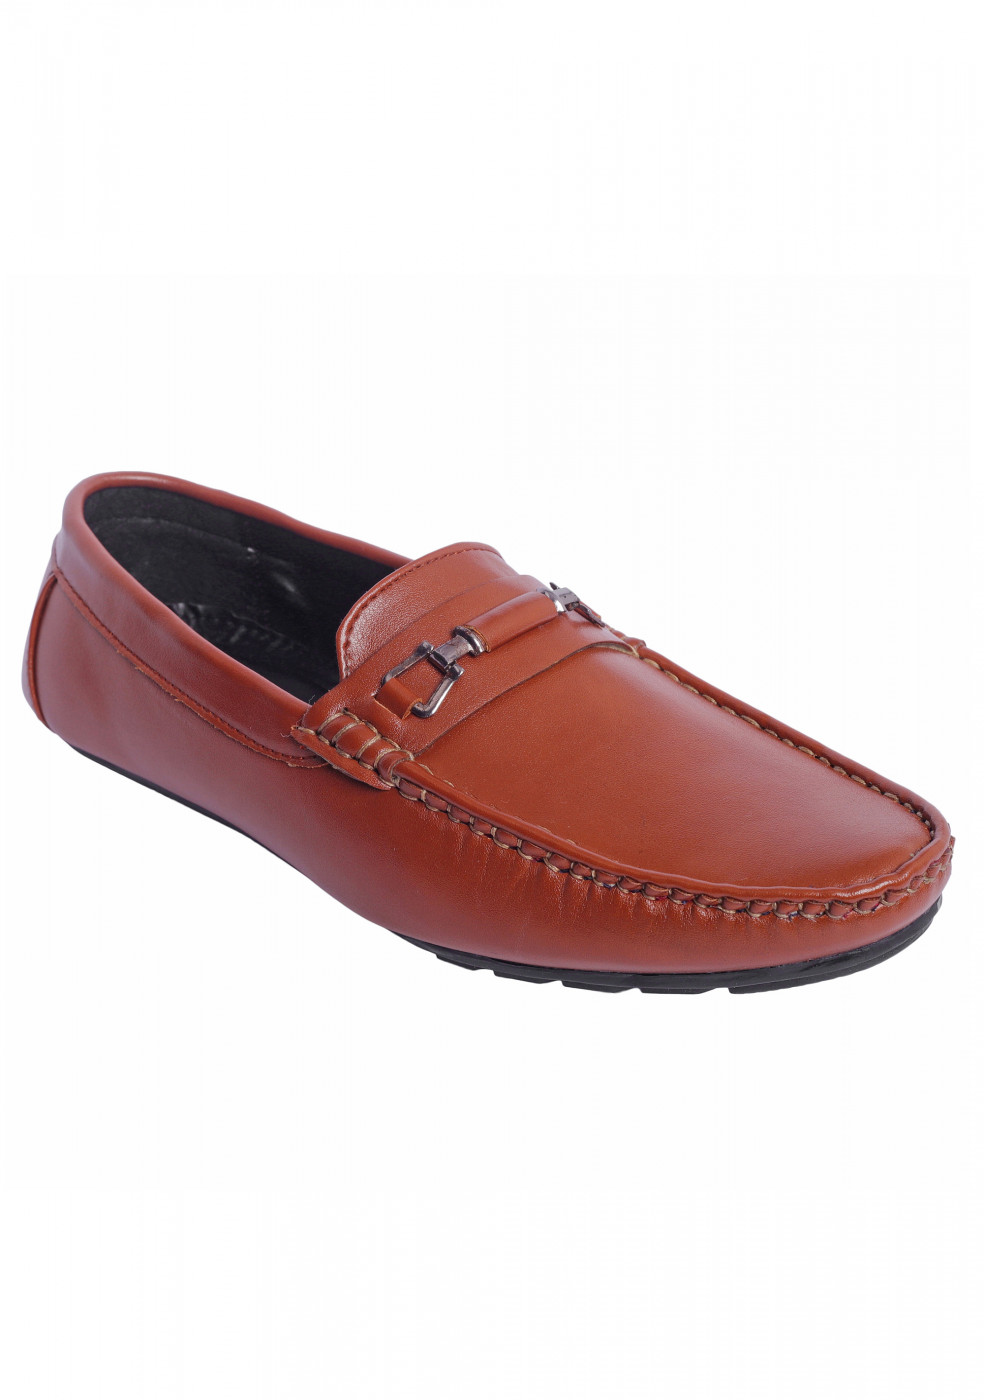 XSTOM Stylish TAN Color Loafers For Men